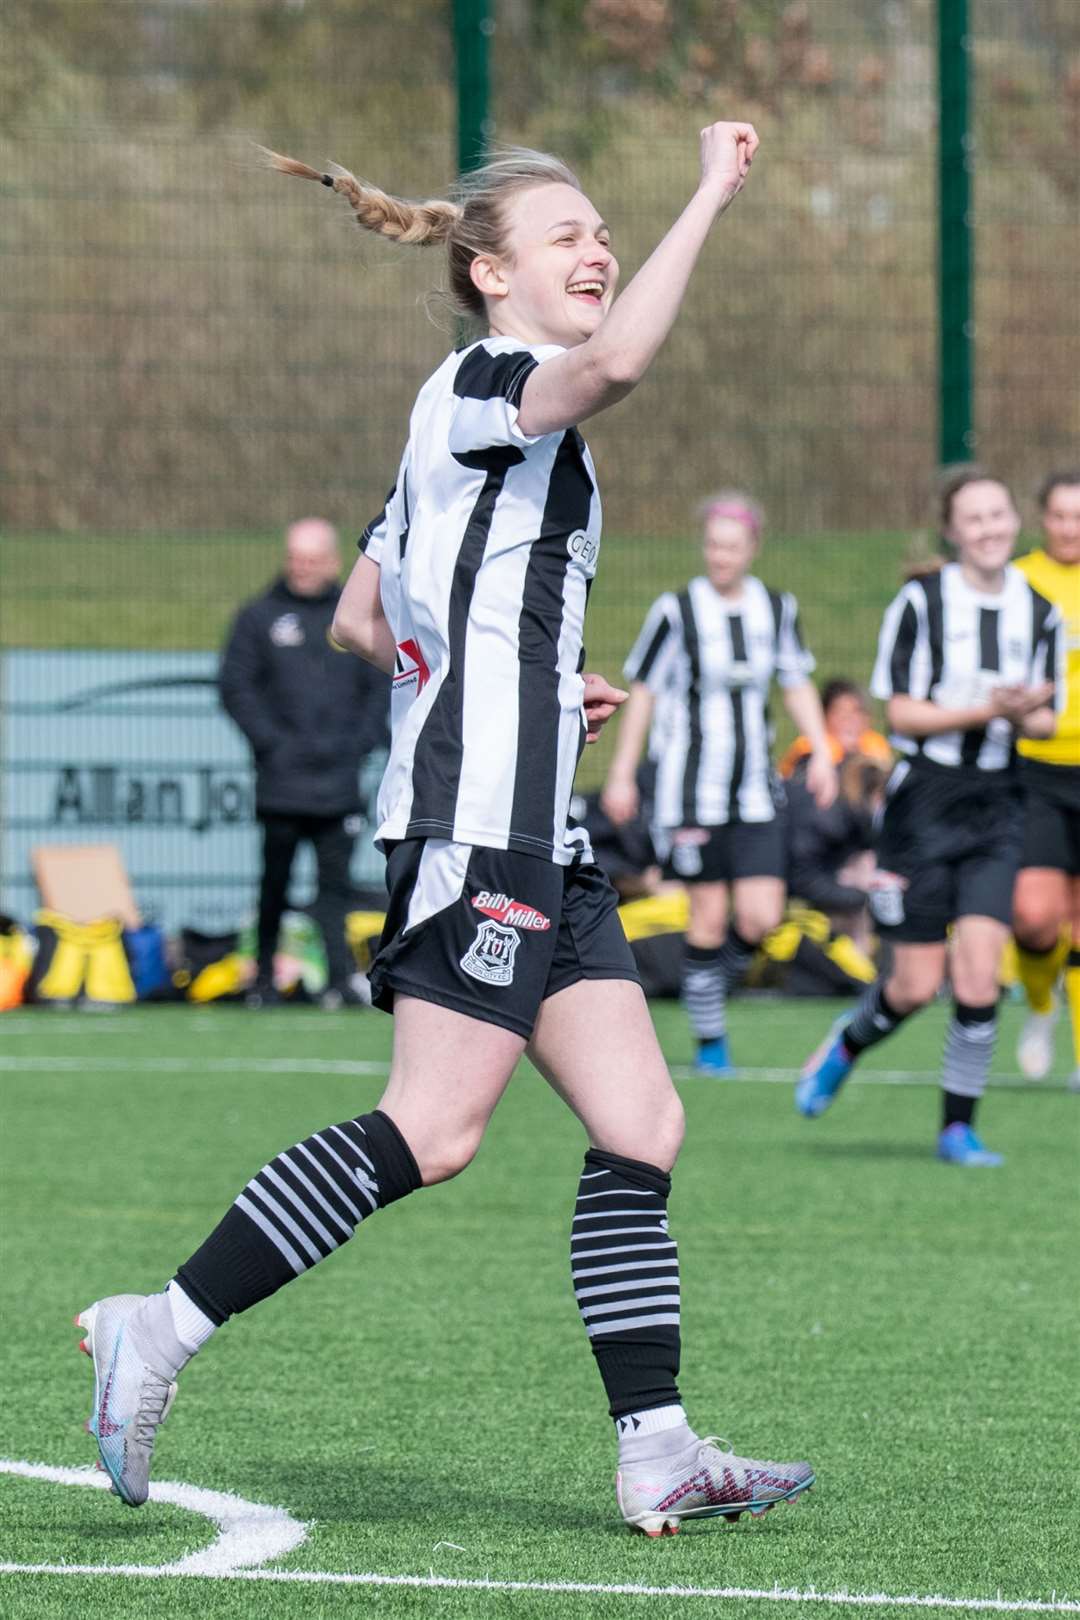 Scoring her fifth goal of the afternoon, Elgin City forward Sarah Westwood makes it 8-0.Picture: Daniel Forsyth.